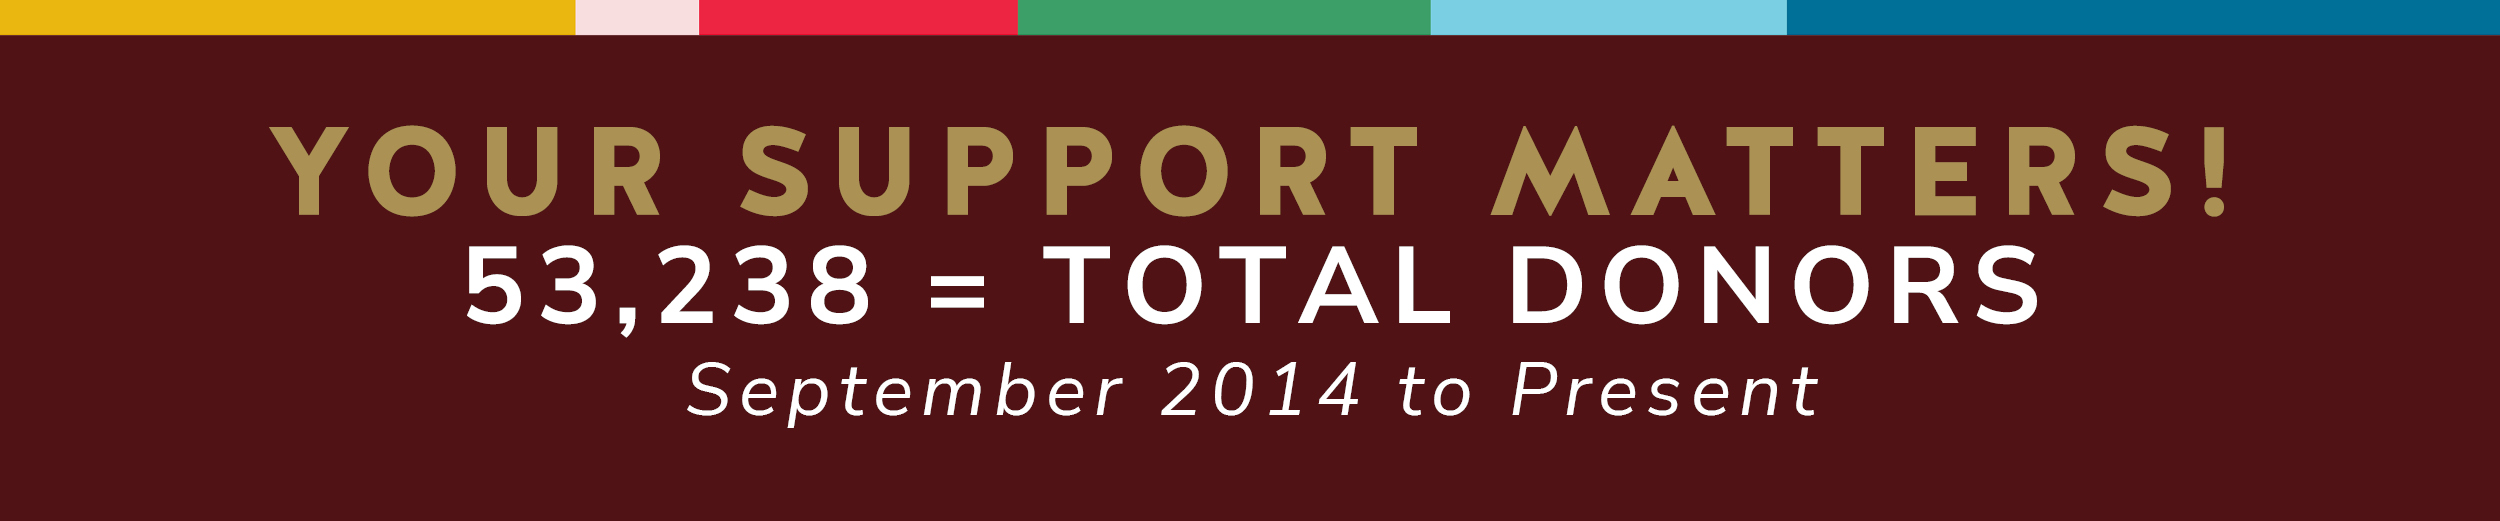 Your Support Matters! 53,238 = Total donors from September 2014 to Present